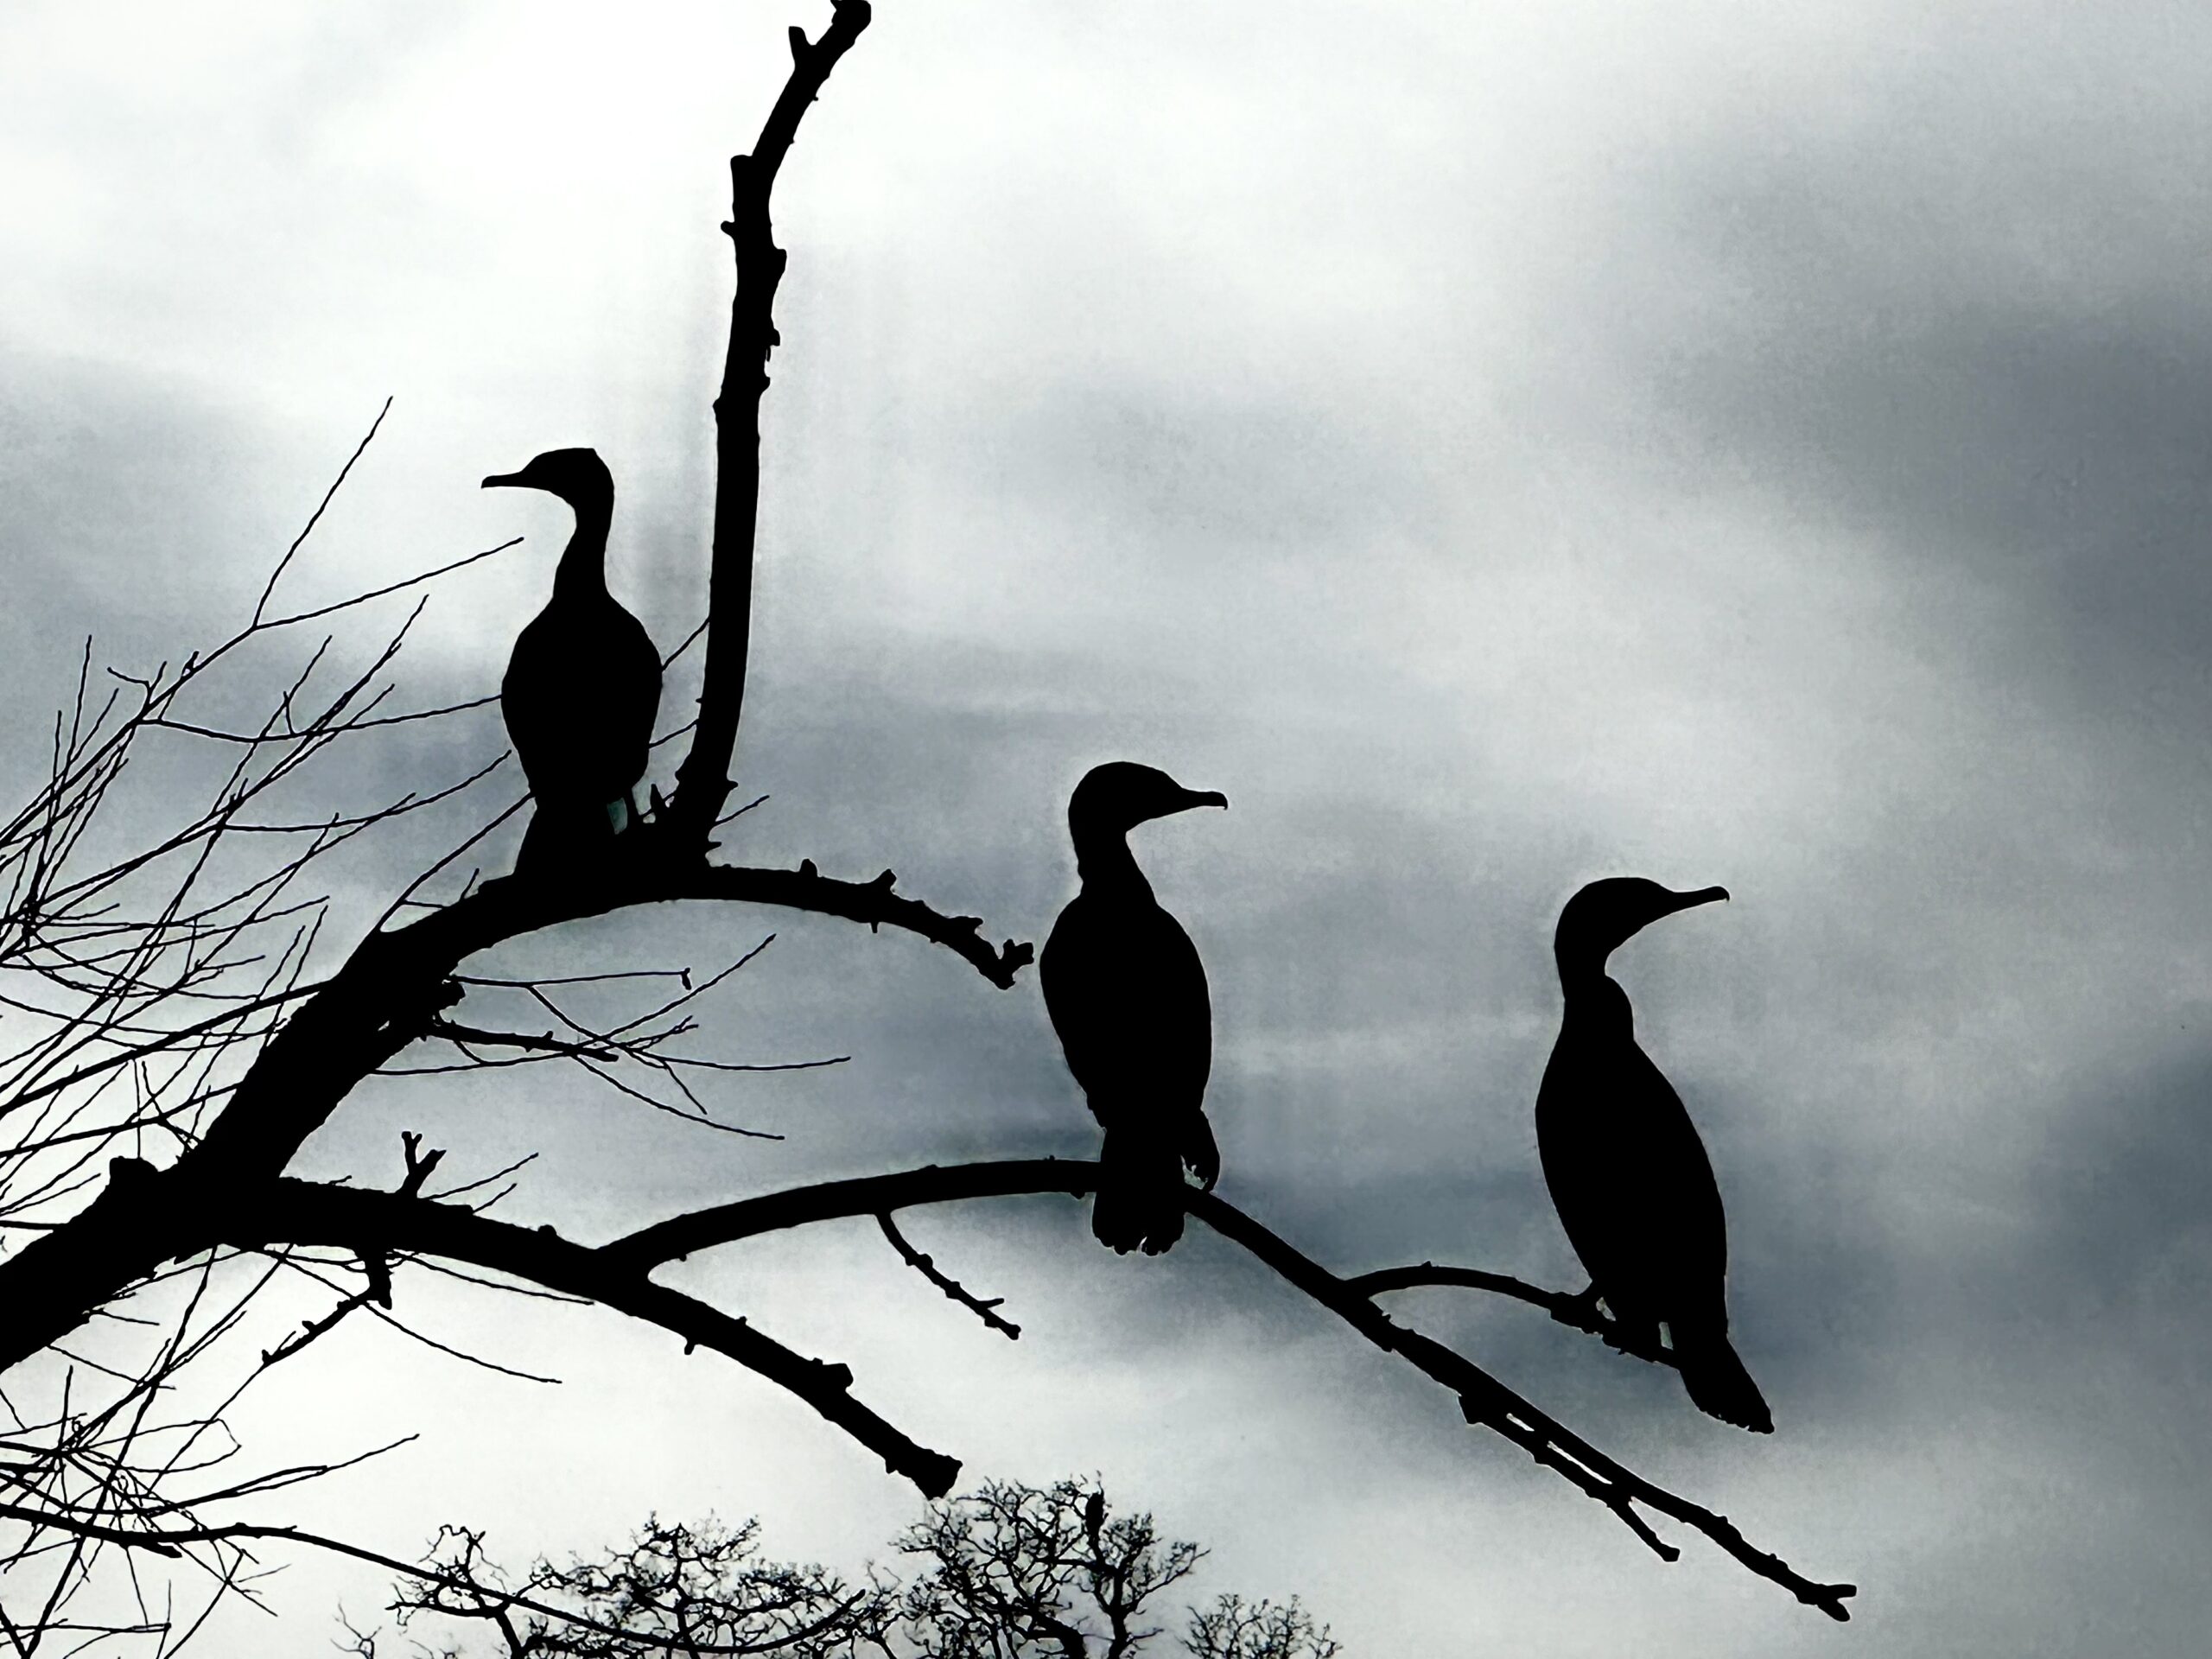 Three birds perched on a tree branch.